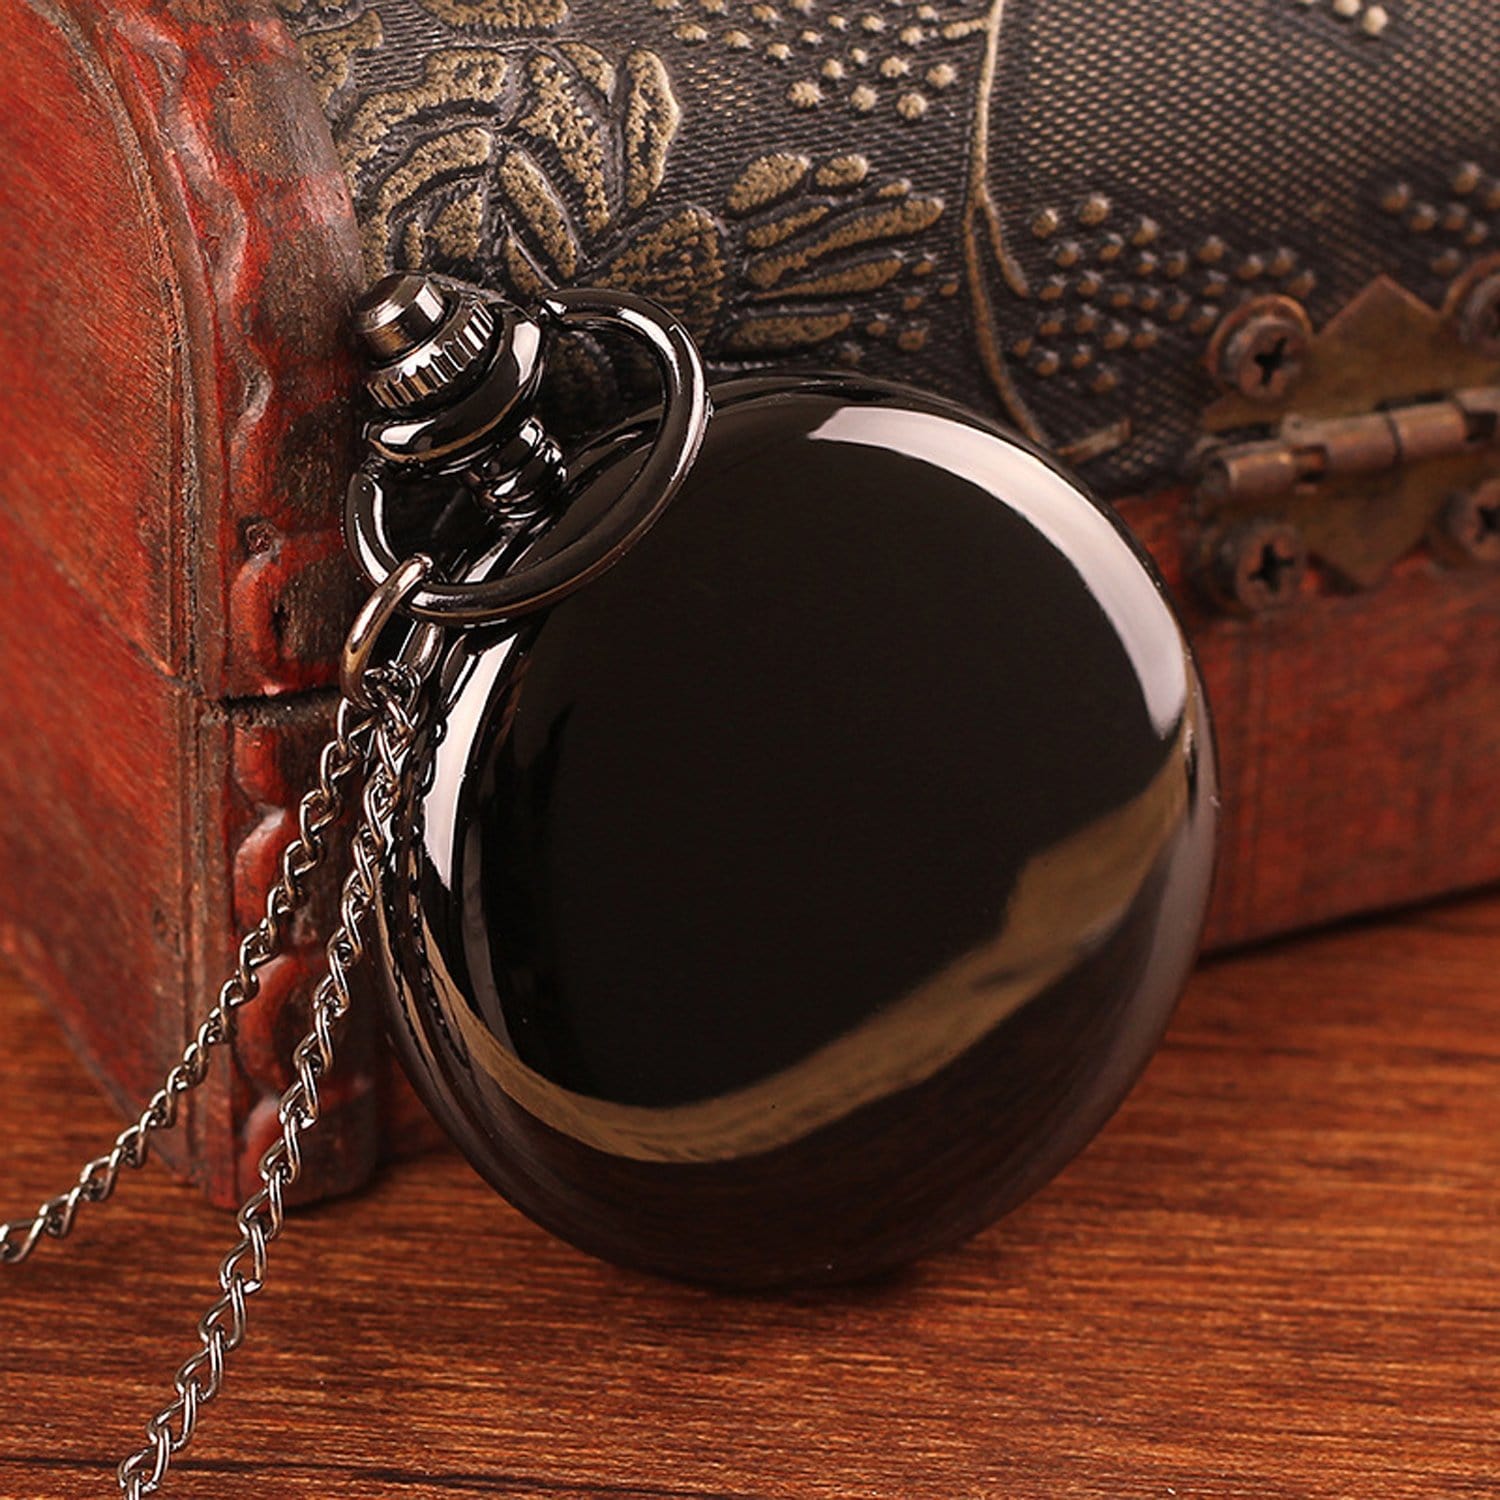 Pocket Watches To My Husband - I Love You Now And Forever Pocket Watch GiveMe-Gifts